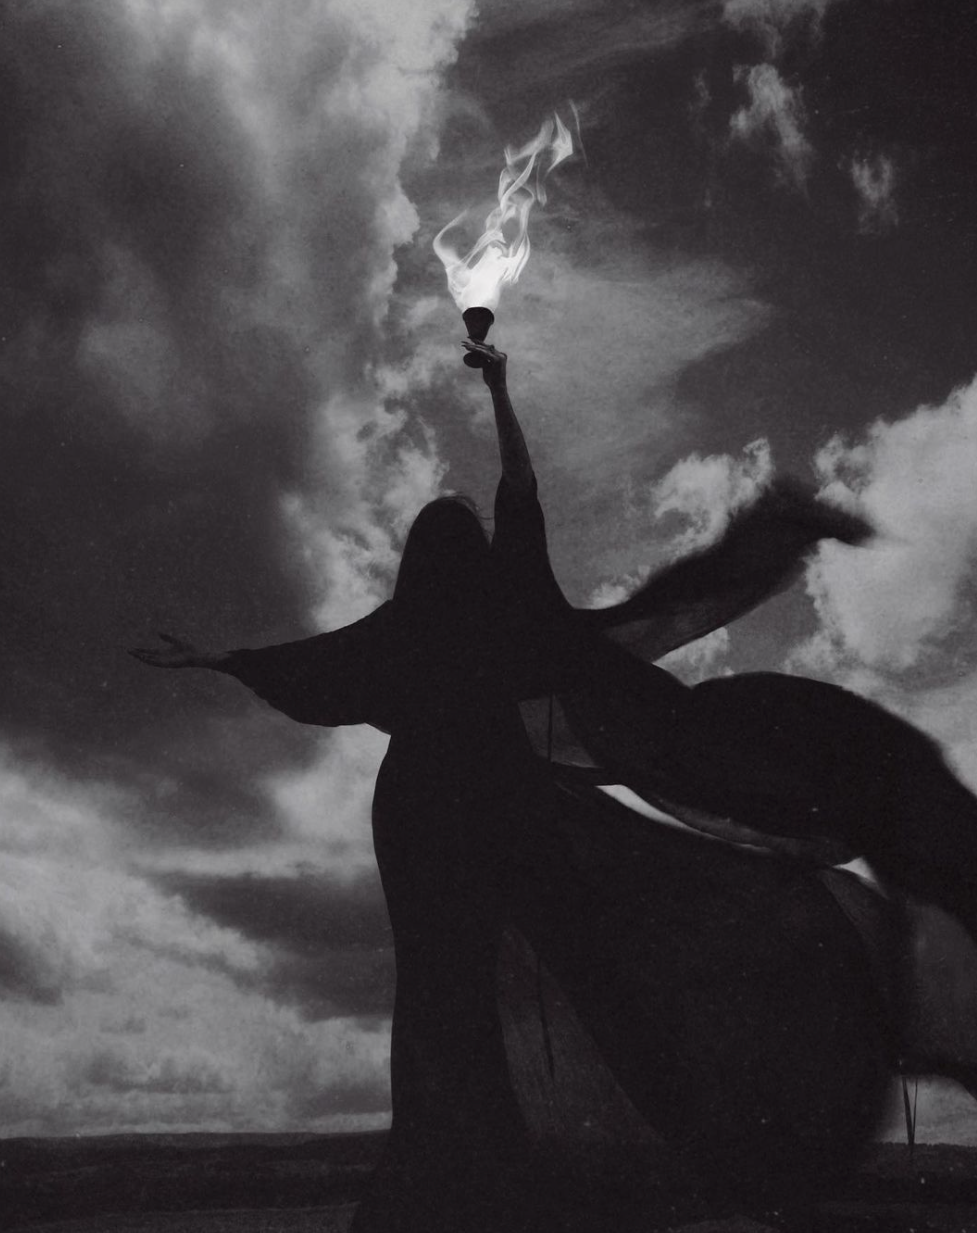 black and white image of a woman holding a flame baring torch up into the stormy cloudy sky.